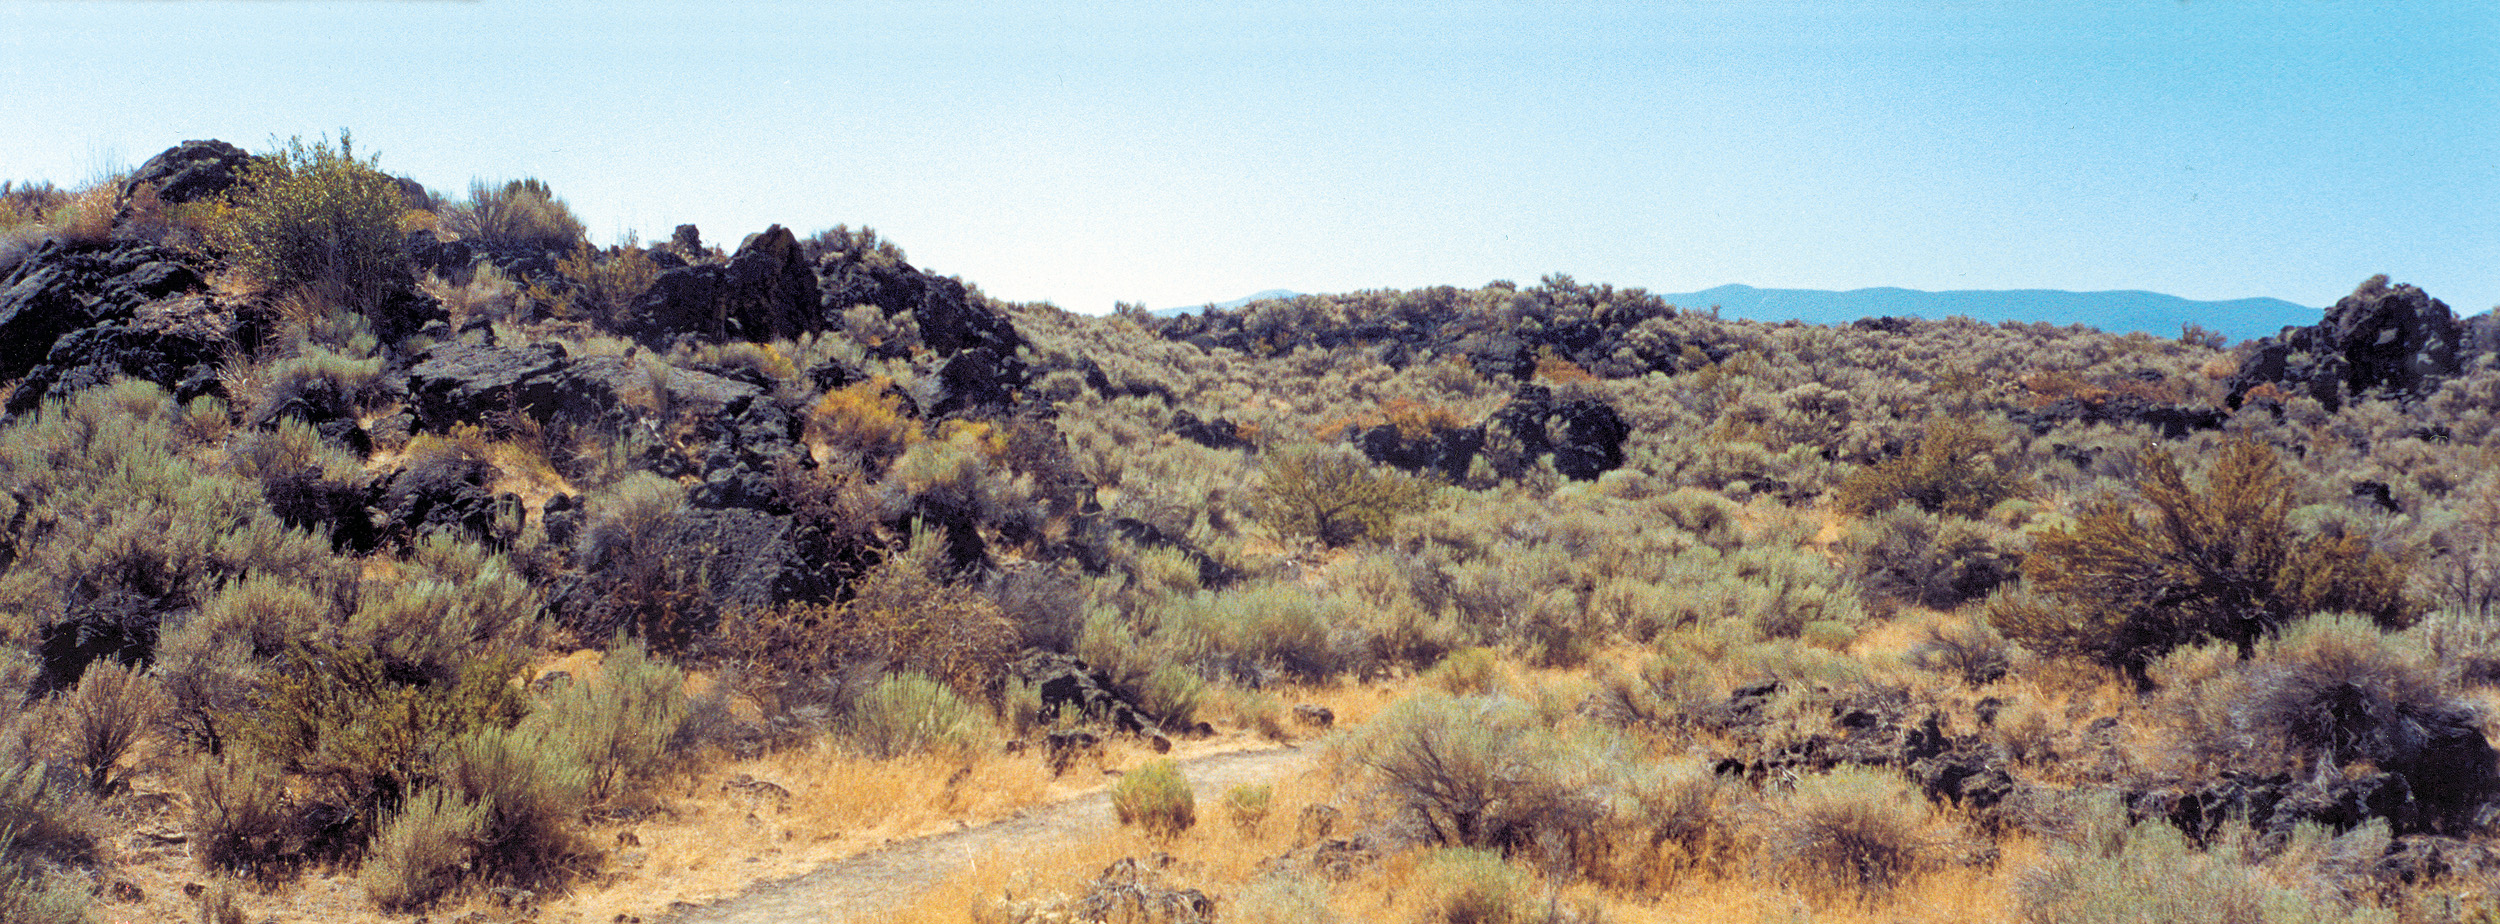 The country over which the Modoc War was fought is a jumble of lava outcroppings and low vegetation.